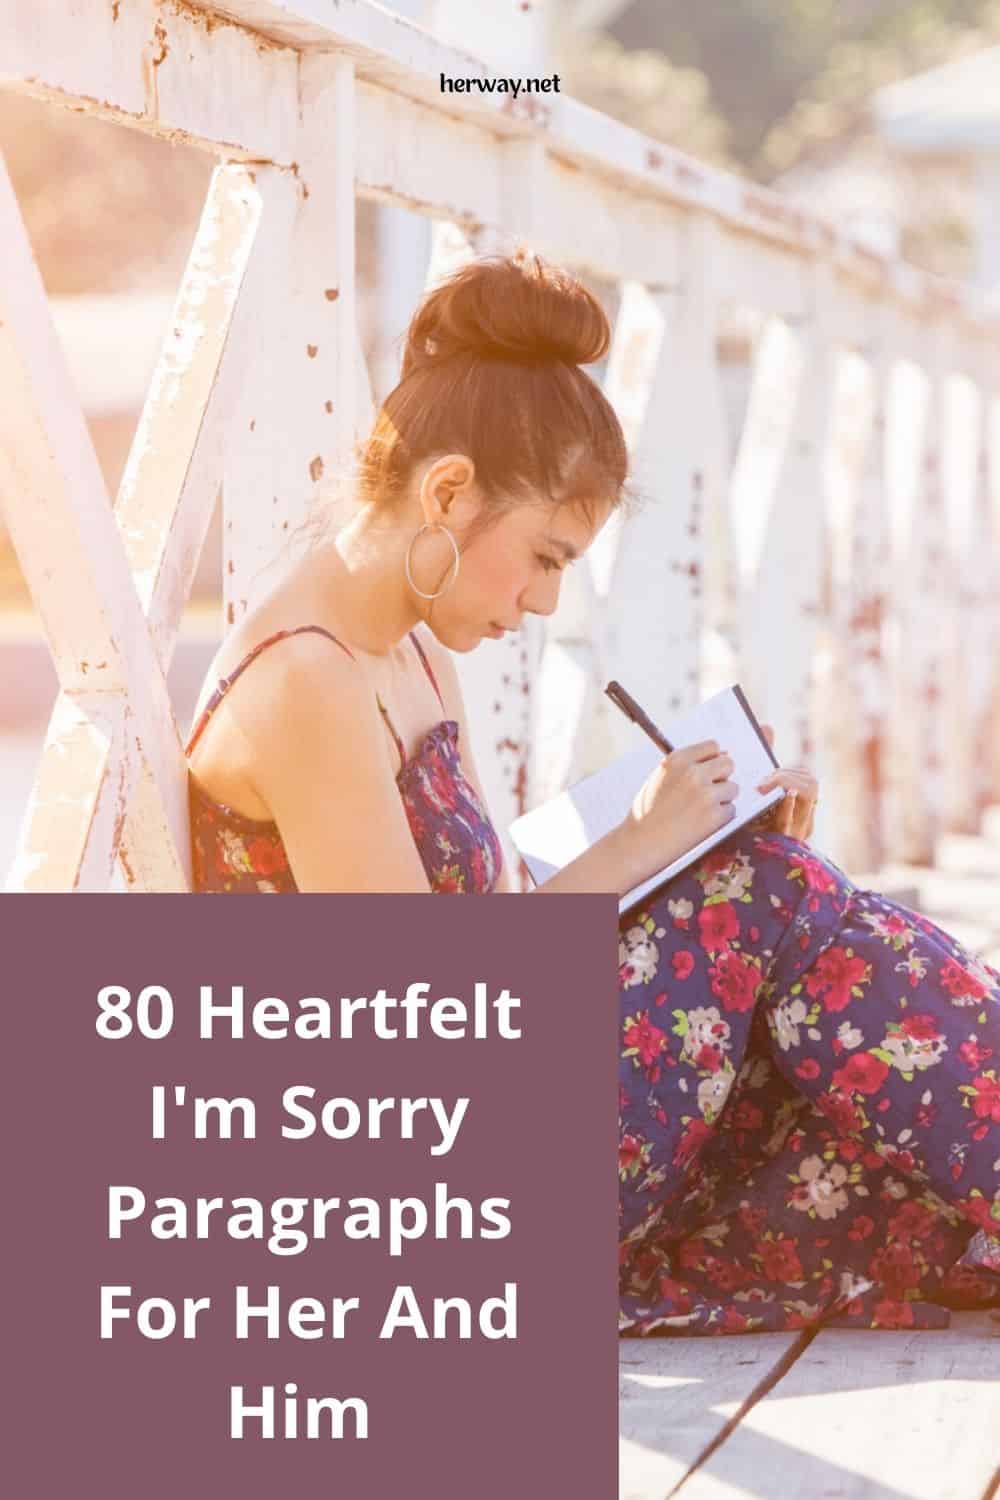 80 Heartfelt I'm Sorry Paragraphs For Her And Him